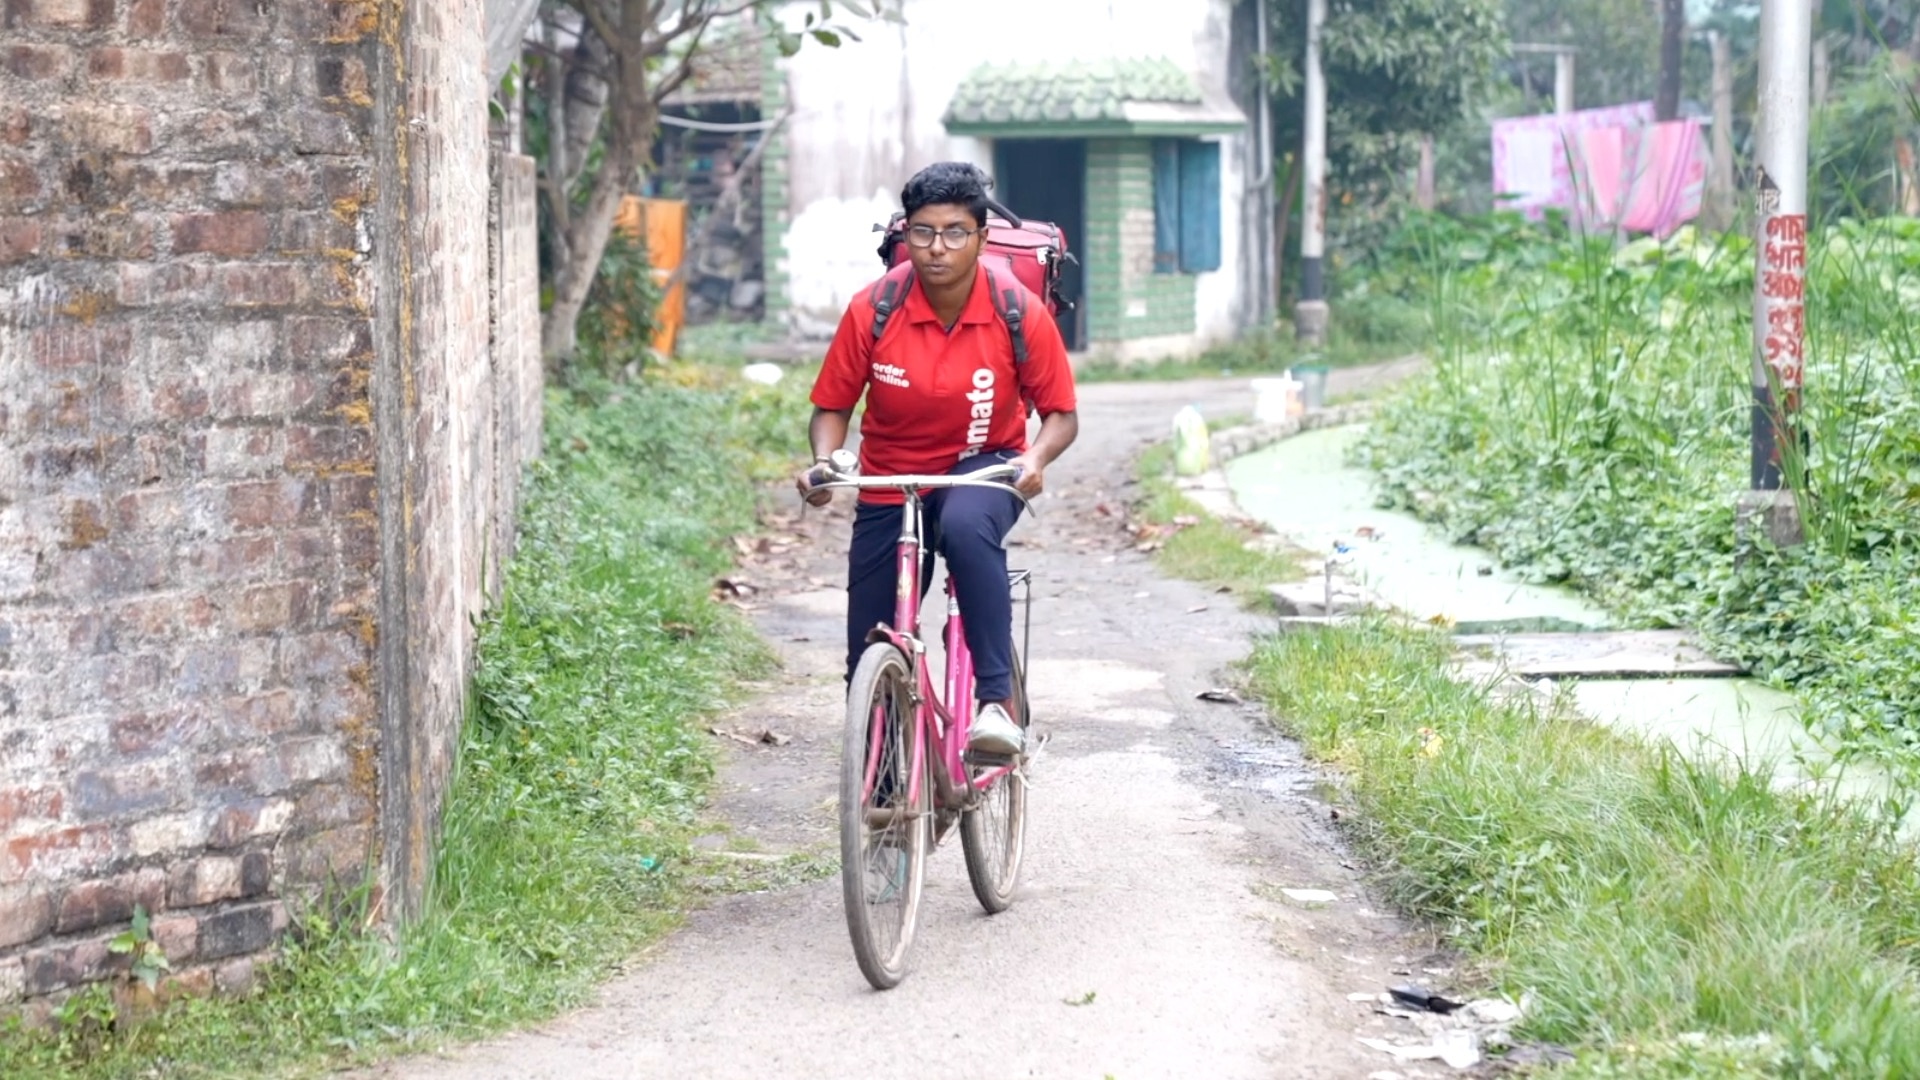 Poulami on her bicycle in her delivery uniform